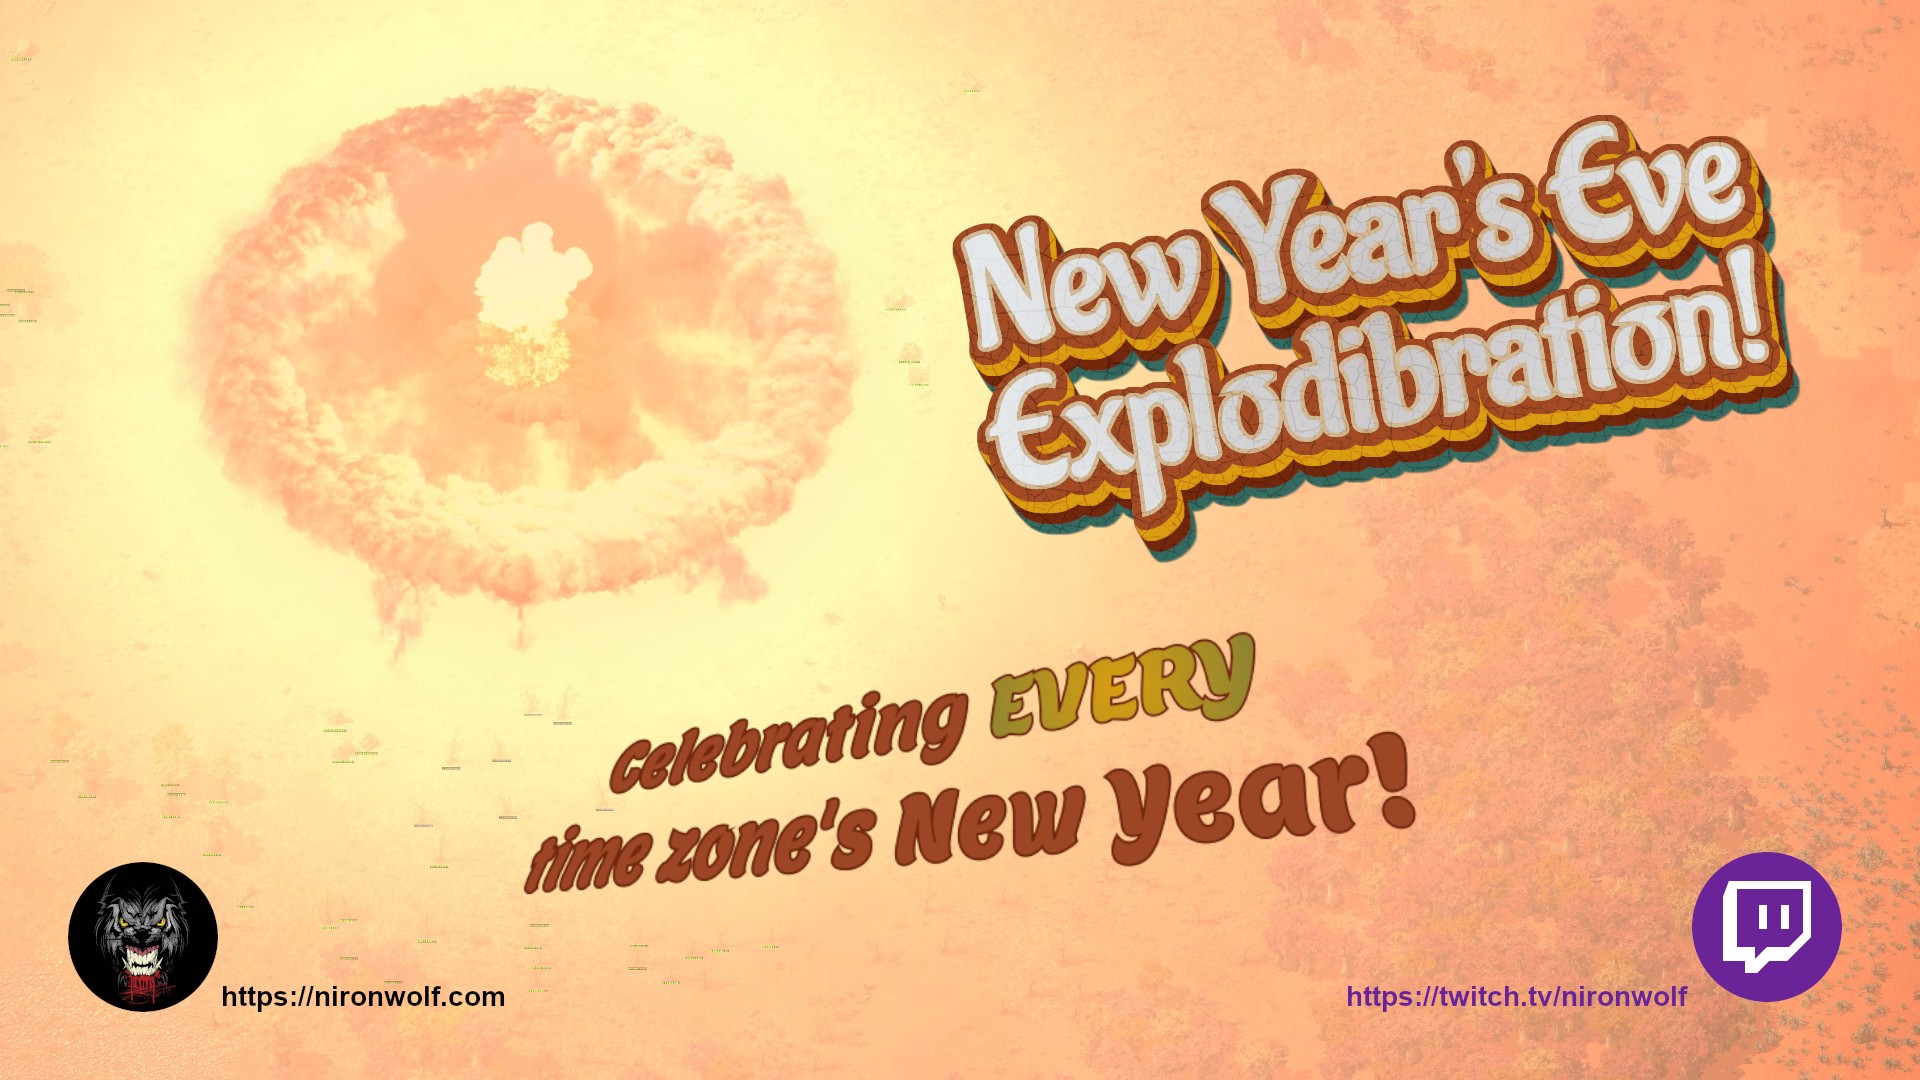 New Year's Eve Explodibration!  Celebrating EVERY time zone's New Year!